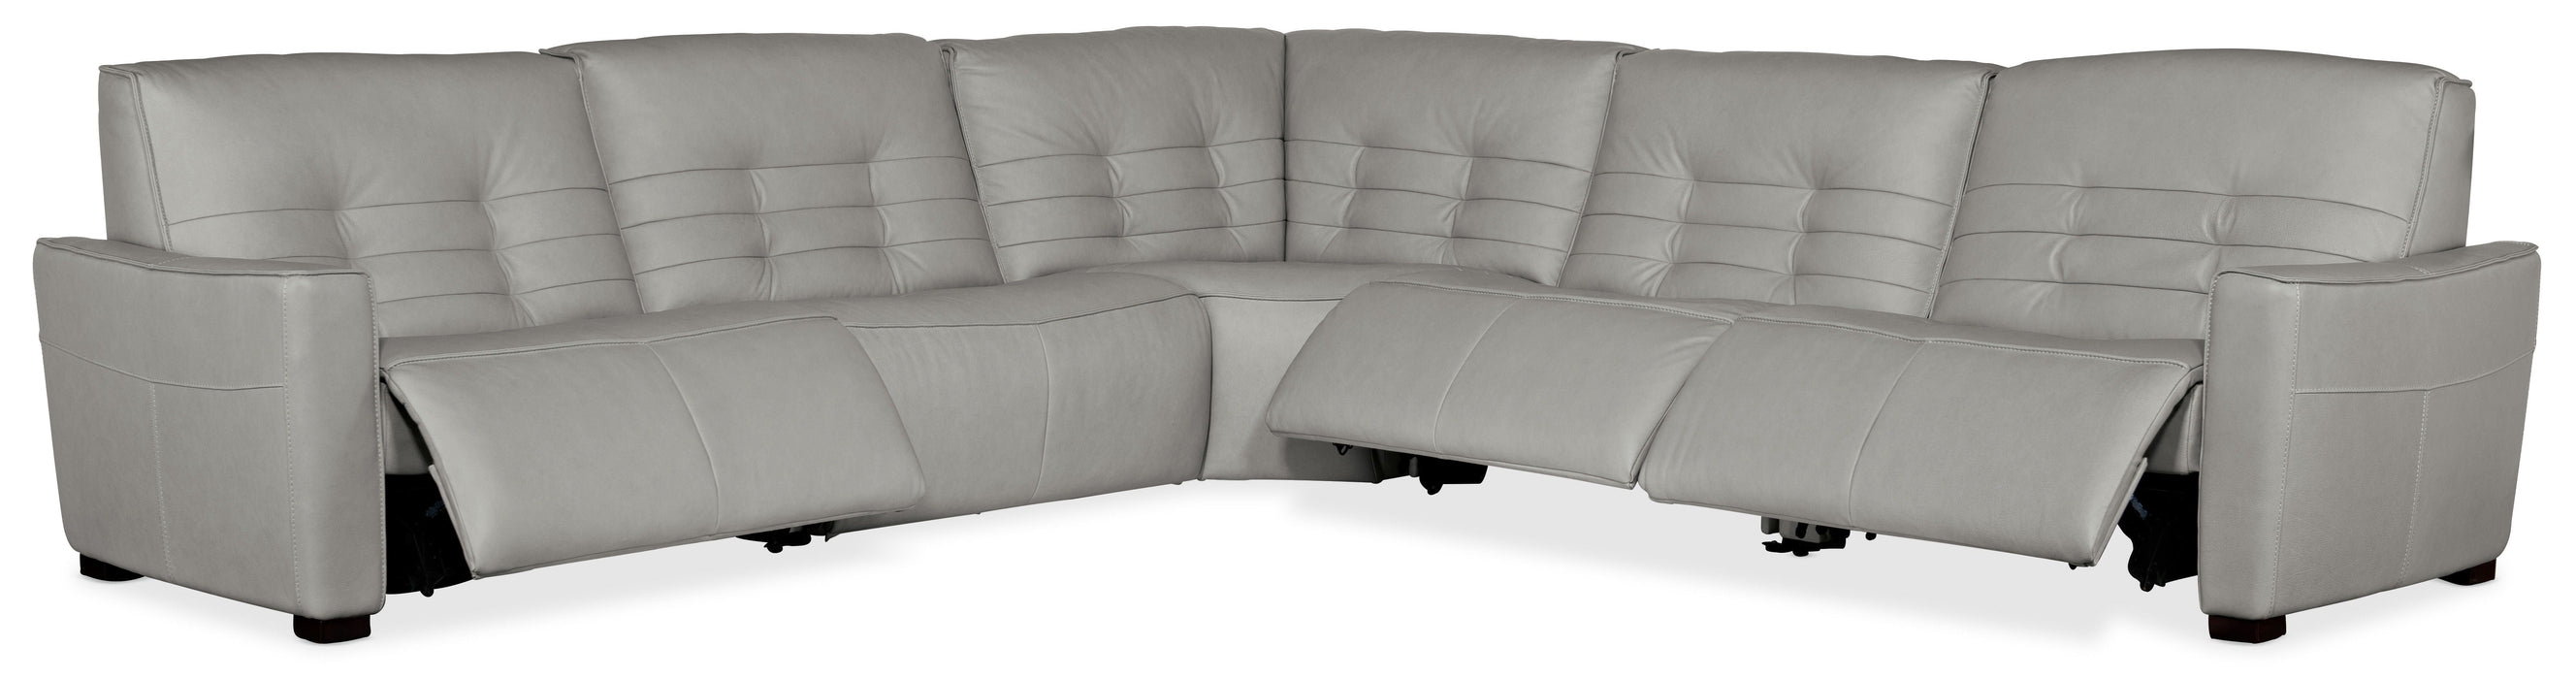 Reaux 5-Piece Power Recline Sectional With Power Recliners